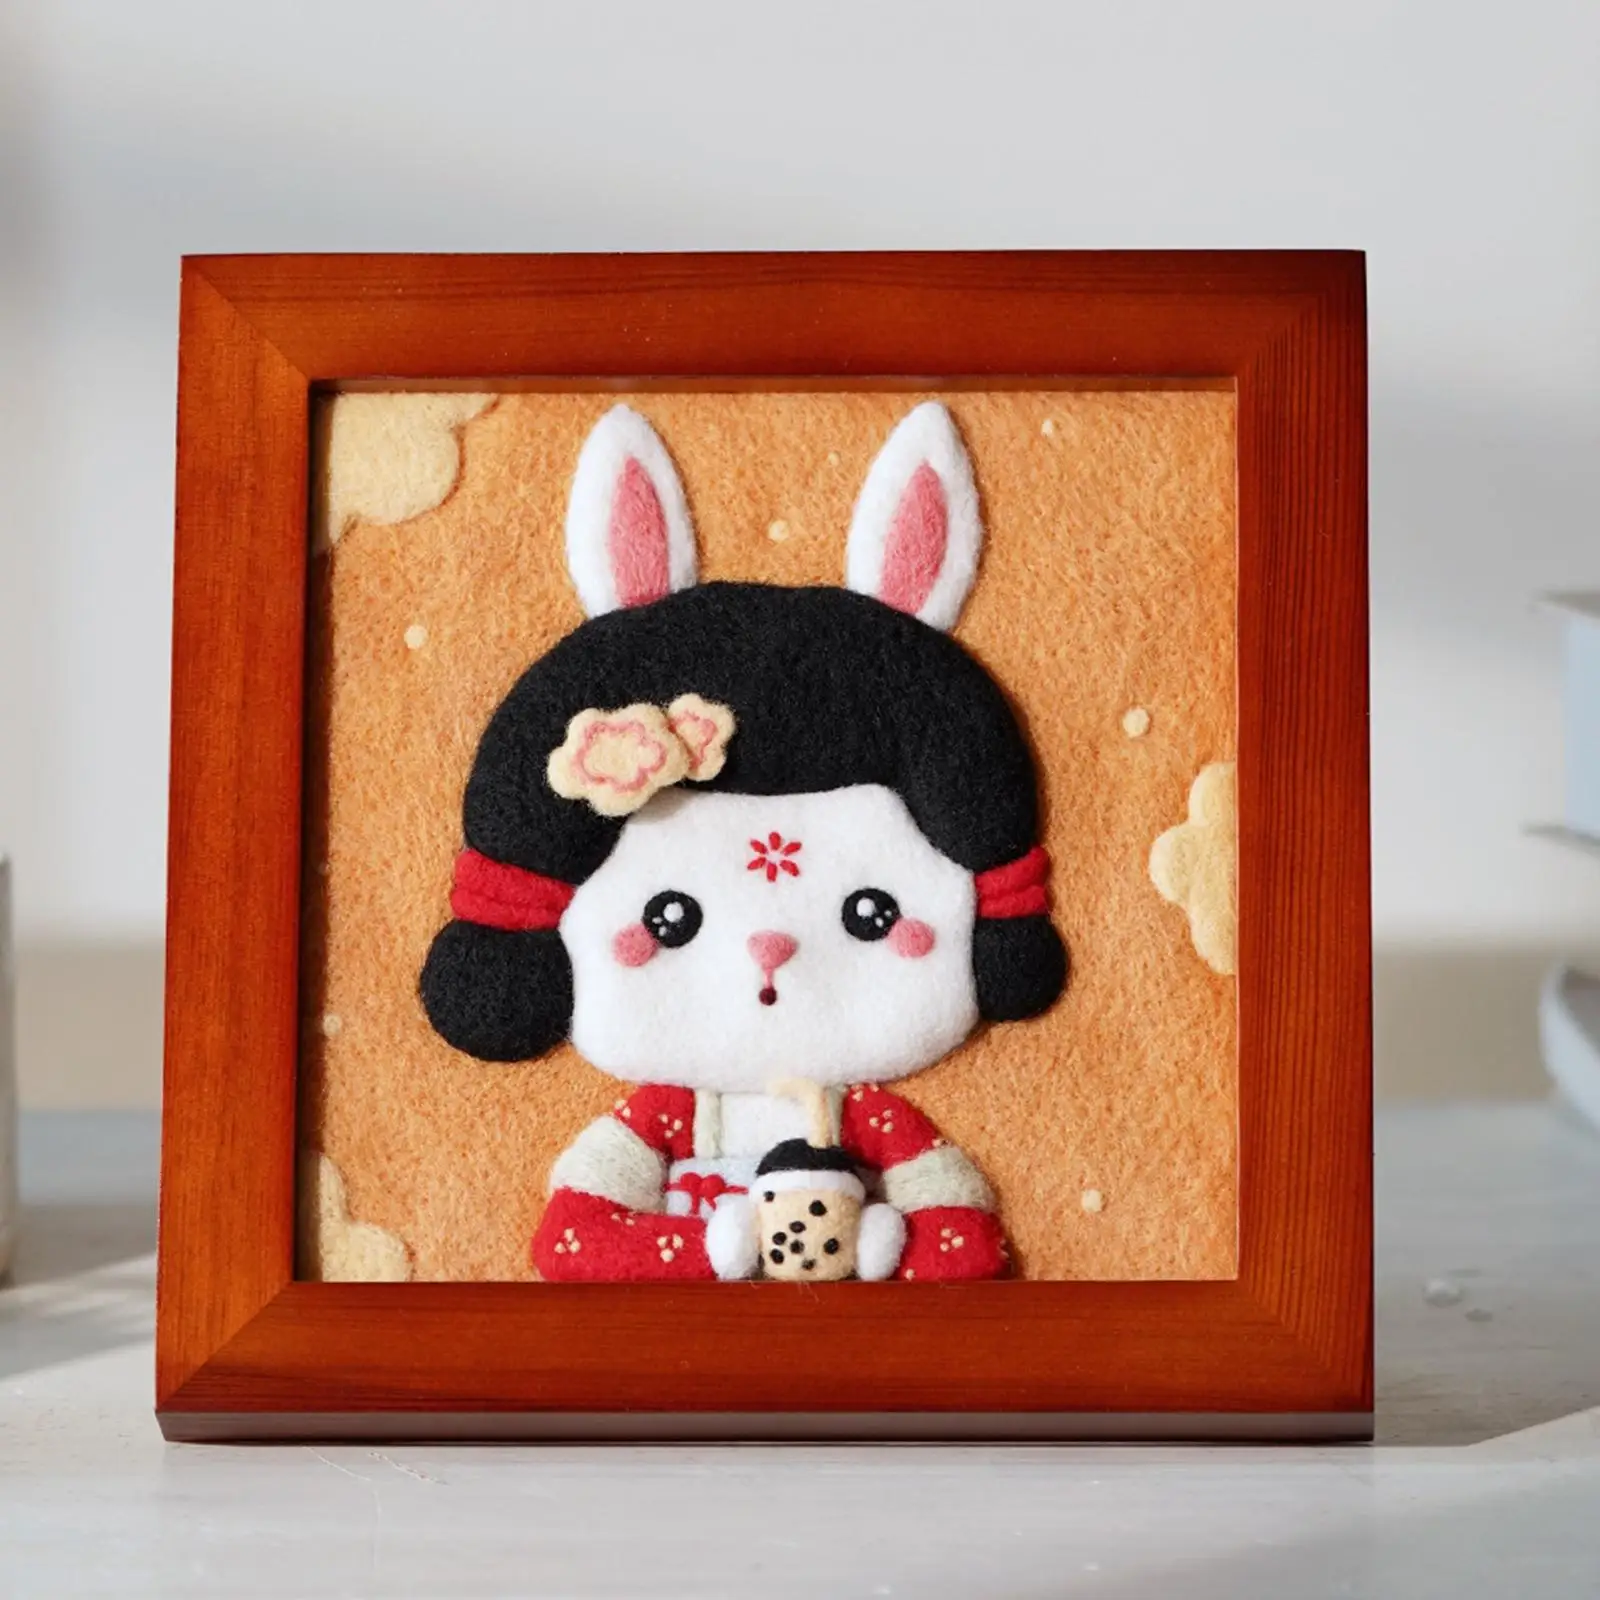 Wool Needle Felting Kit Gift DIY Decor with Photo Frame Set Painting Cute Supplies for Starter Holiday Children Friends Home